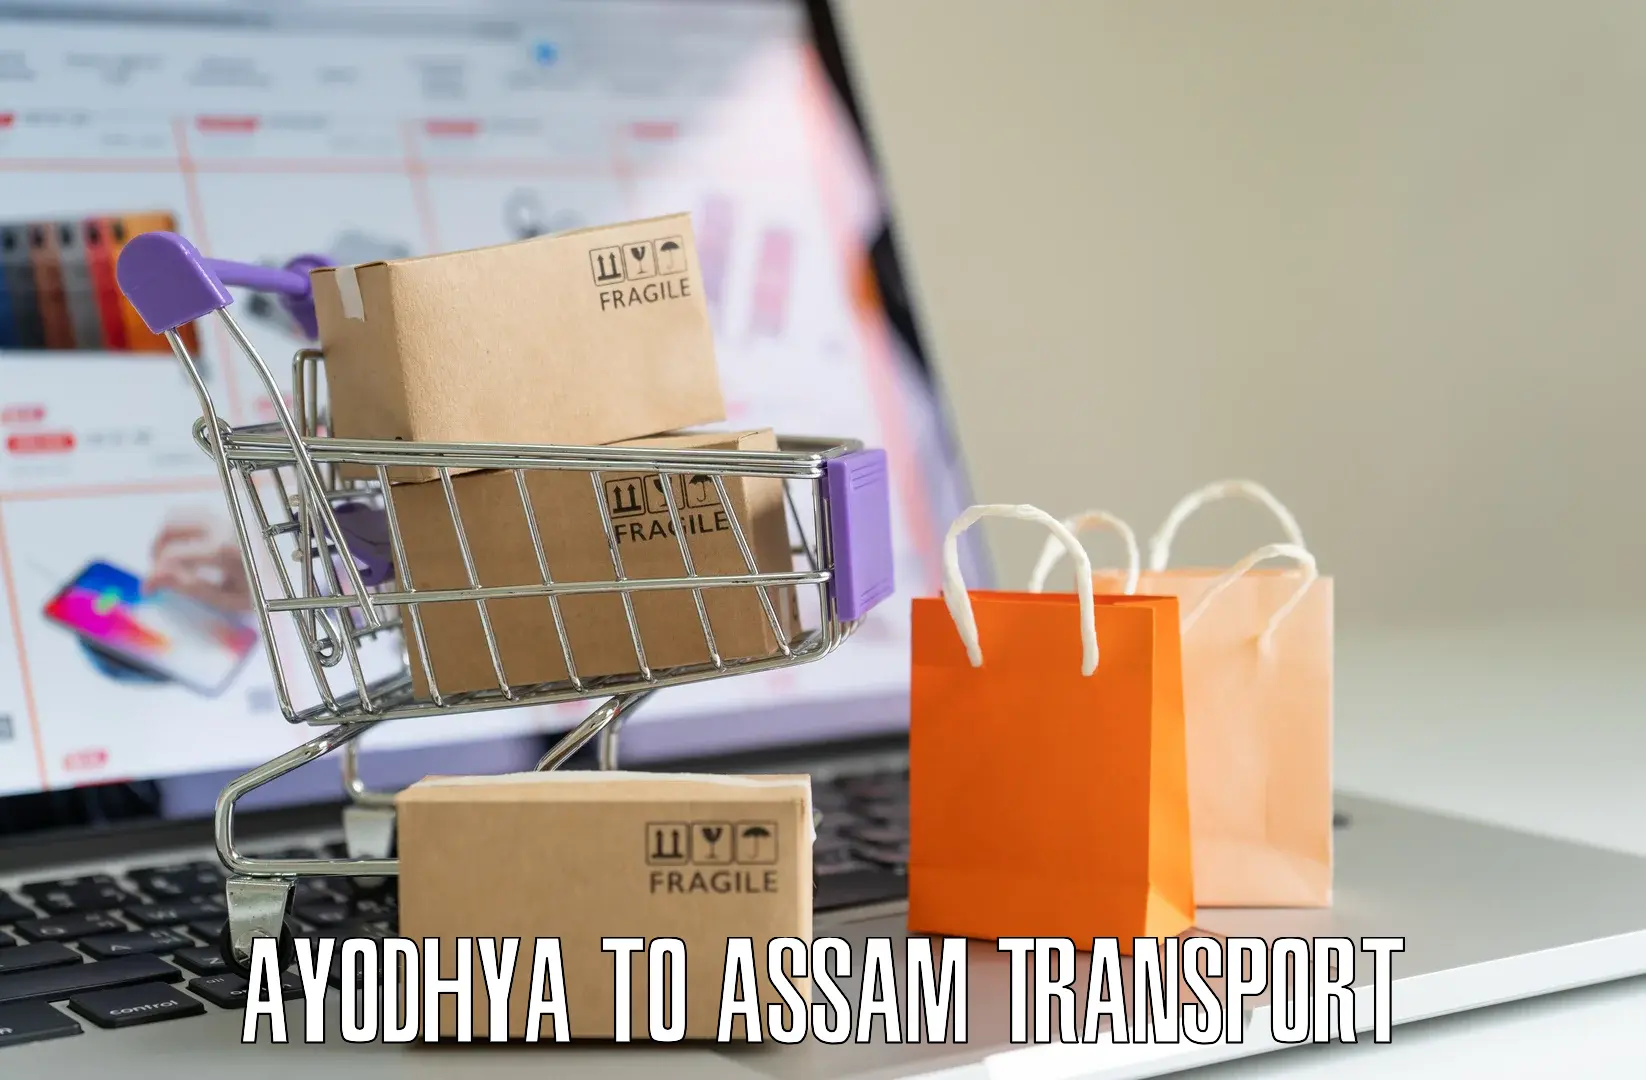 Nearby transport service Ayodhya to Silapathar